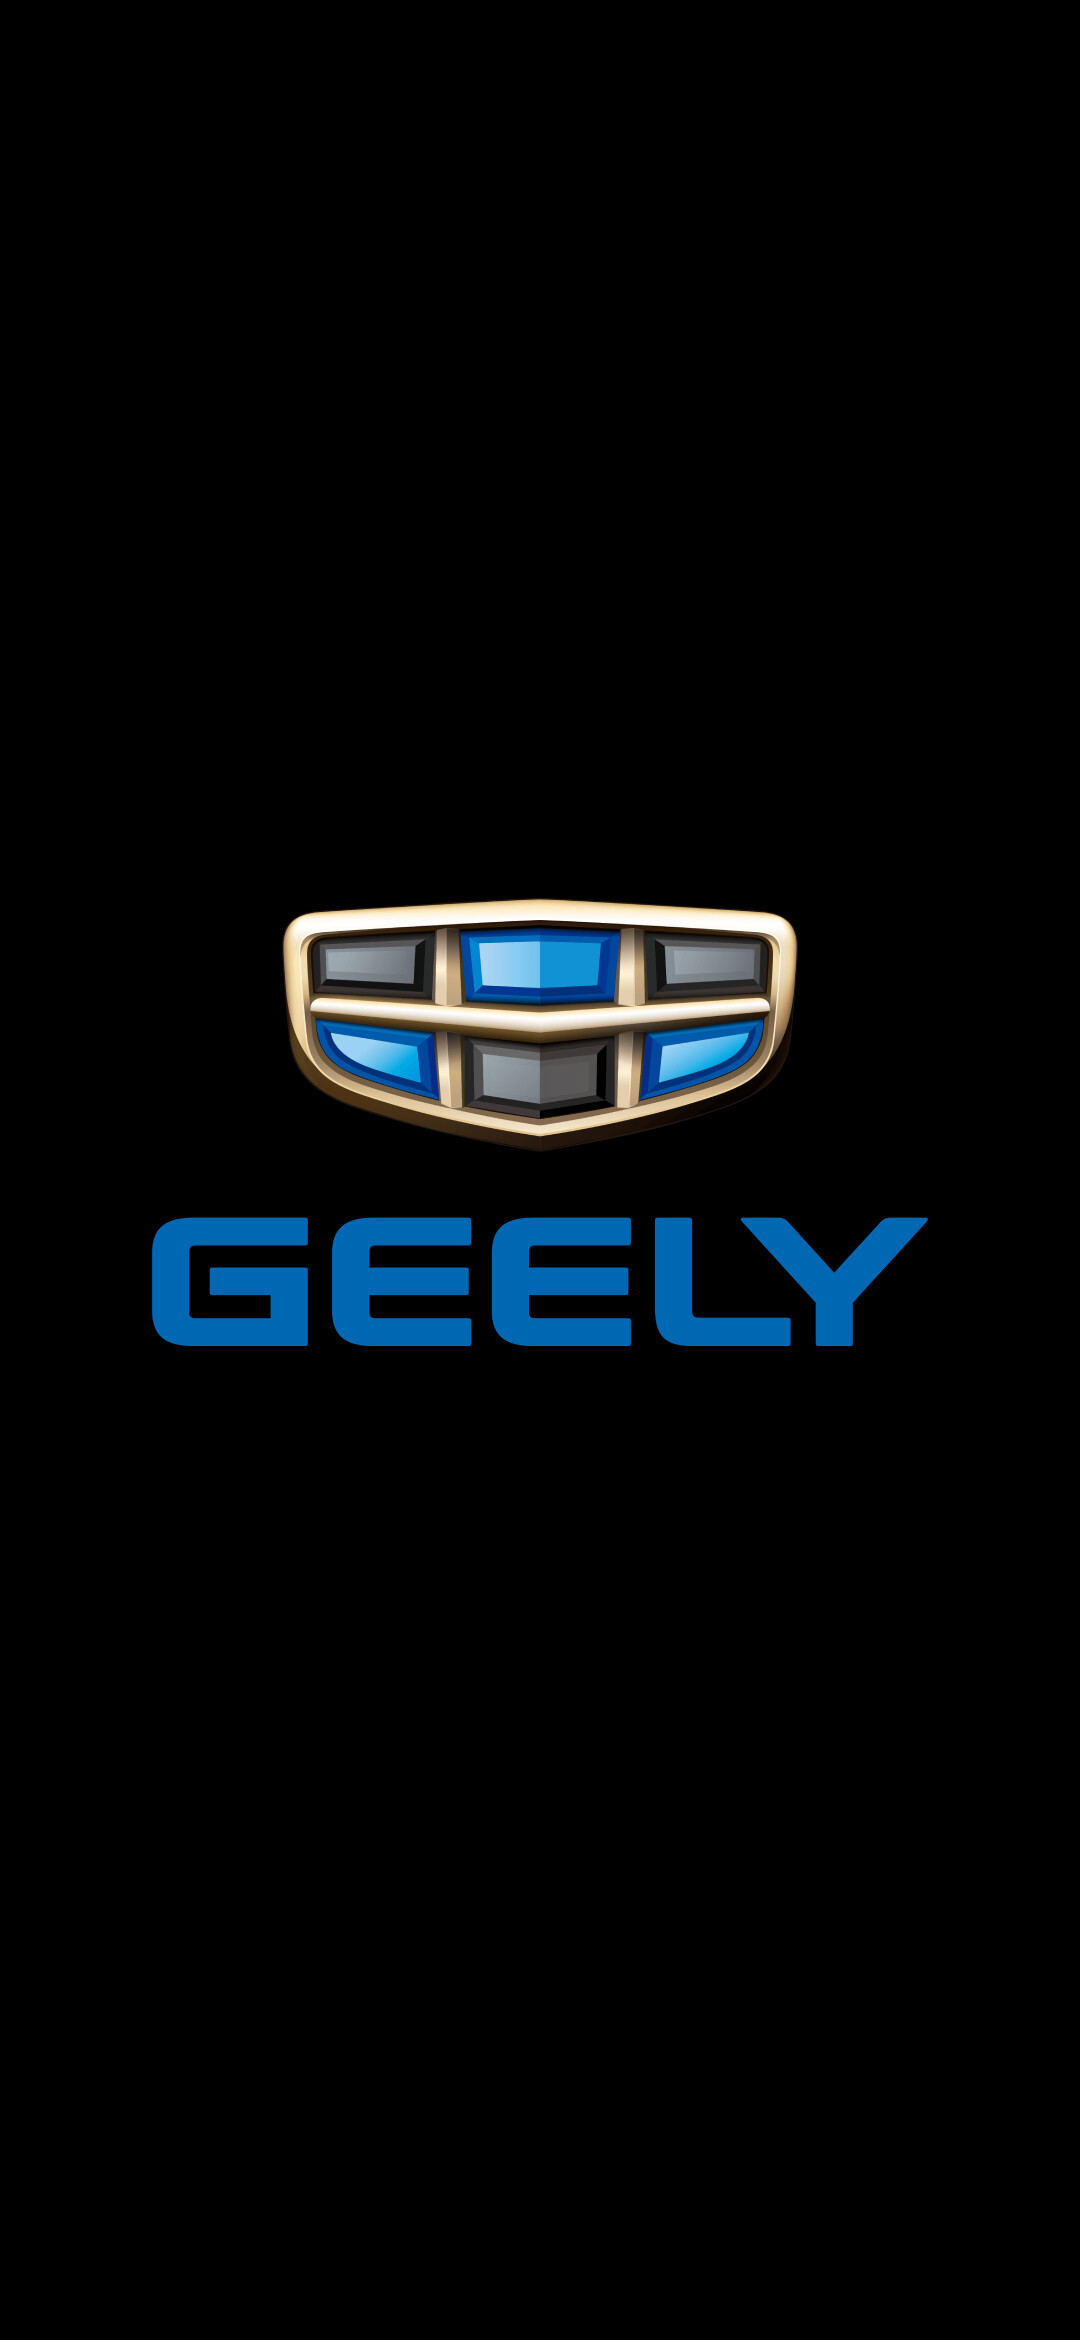 Geely: Acquired the Swedish passenger carmaker Volvo Cars from Ford Motor Company in 2010. 1080x2340 HD Background.